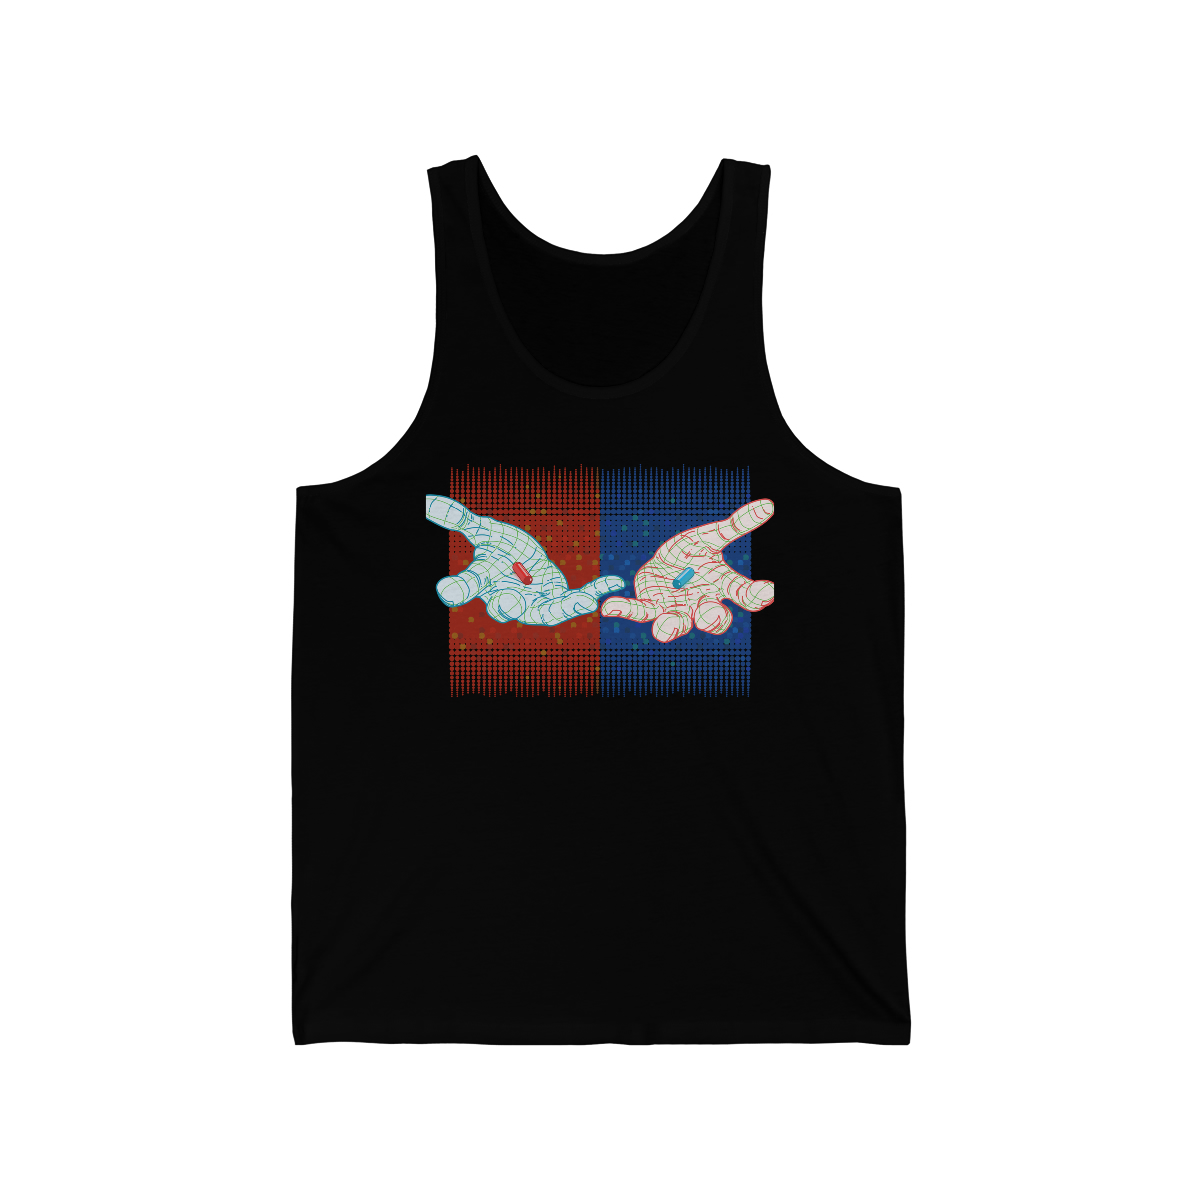 Two Hands (red & blue) - Unisex Jersey Tank